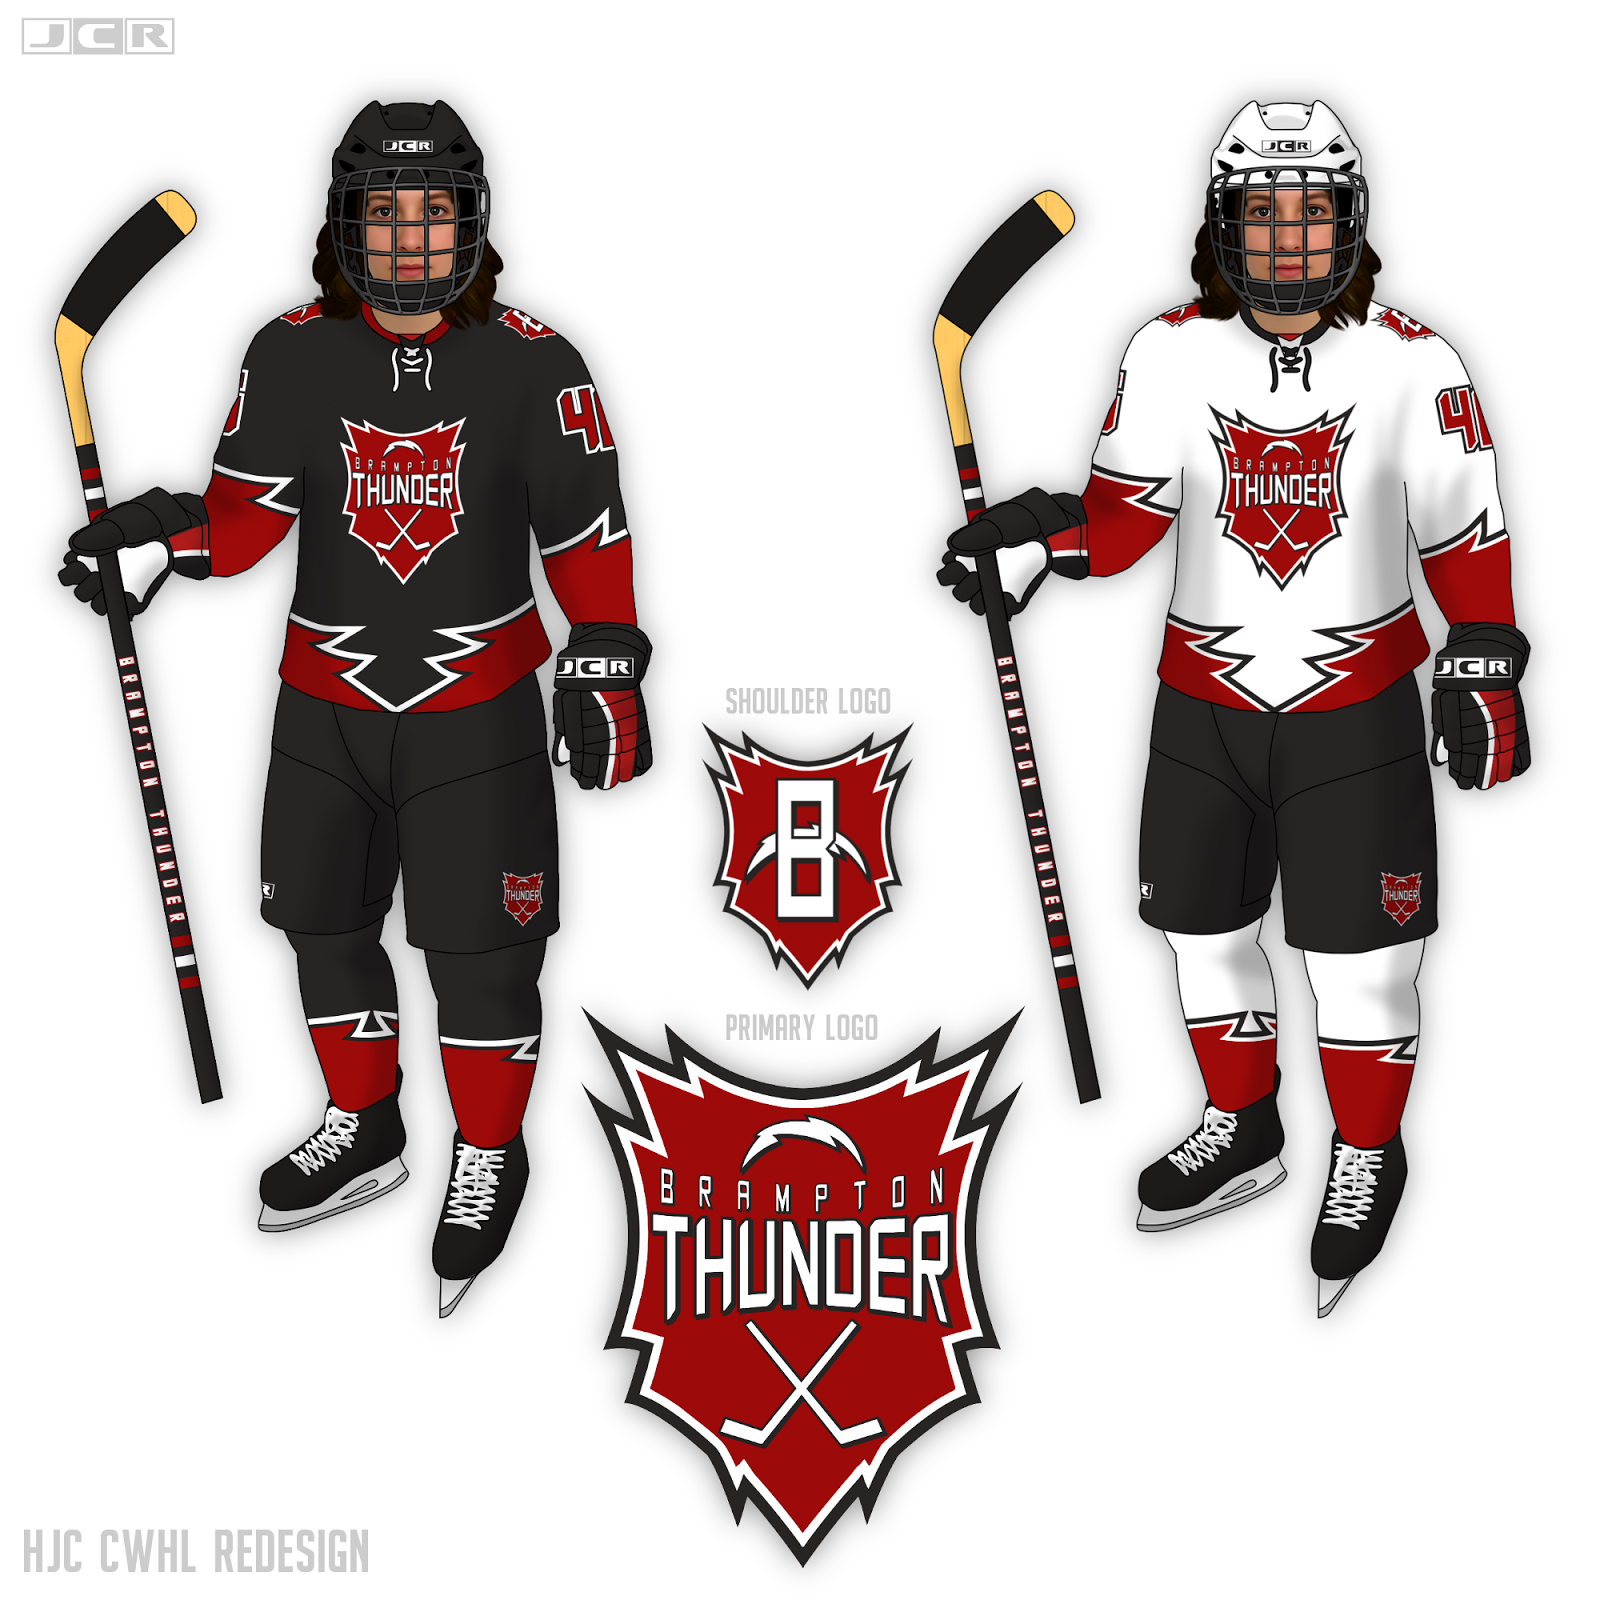 cwhlredesign.png